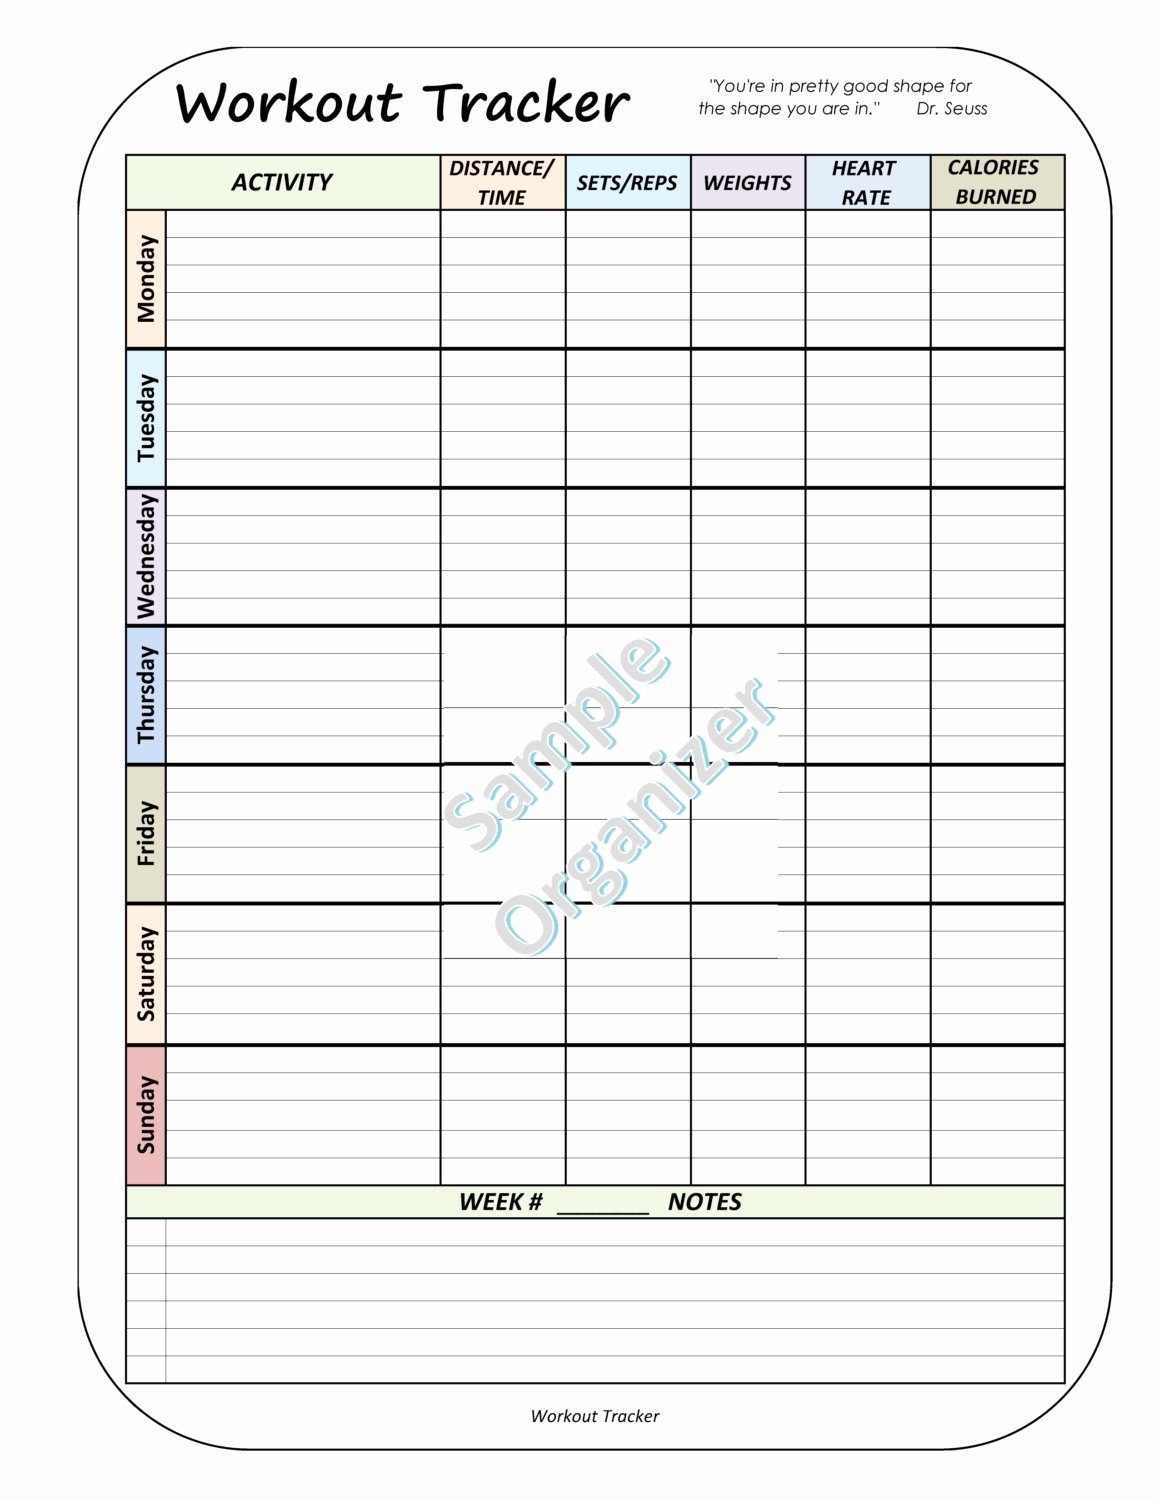 Weight Lifting Tracking Sheet Fresh Workout Tracker Fitness Routine Log Daily Exercise